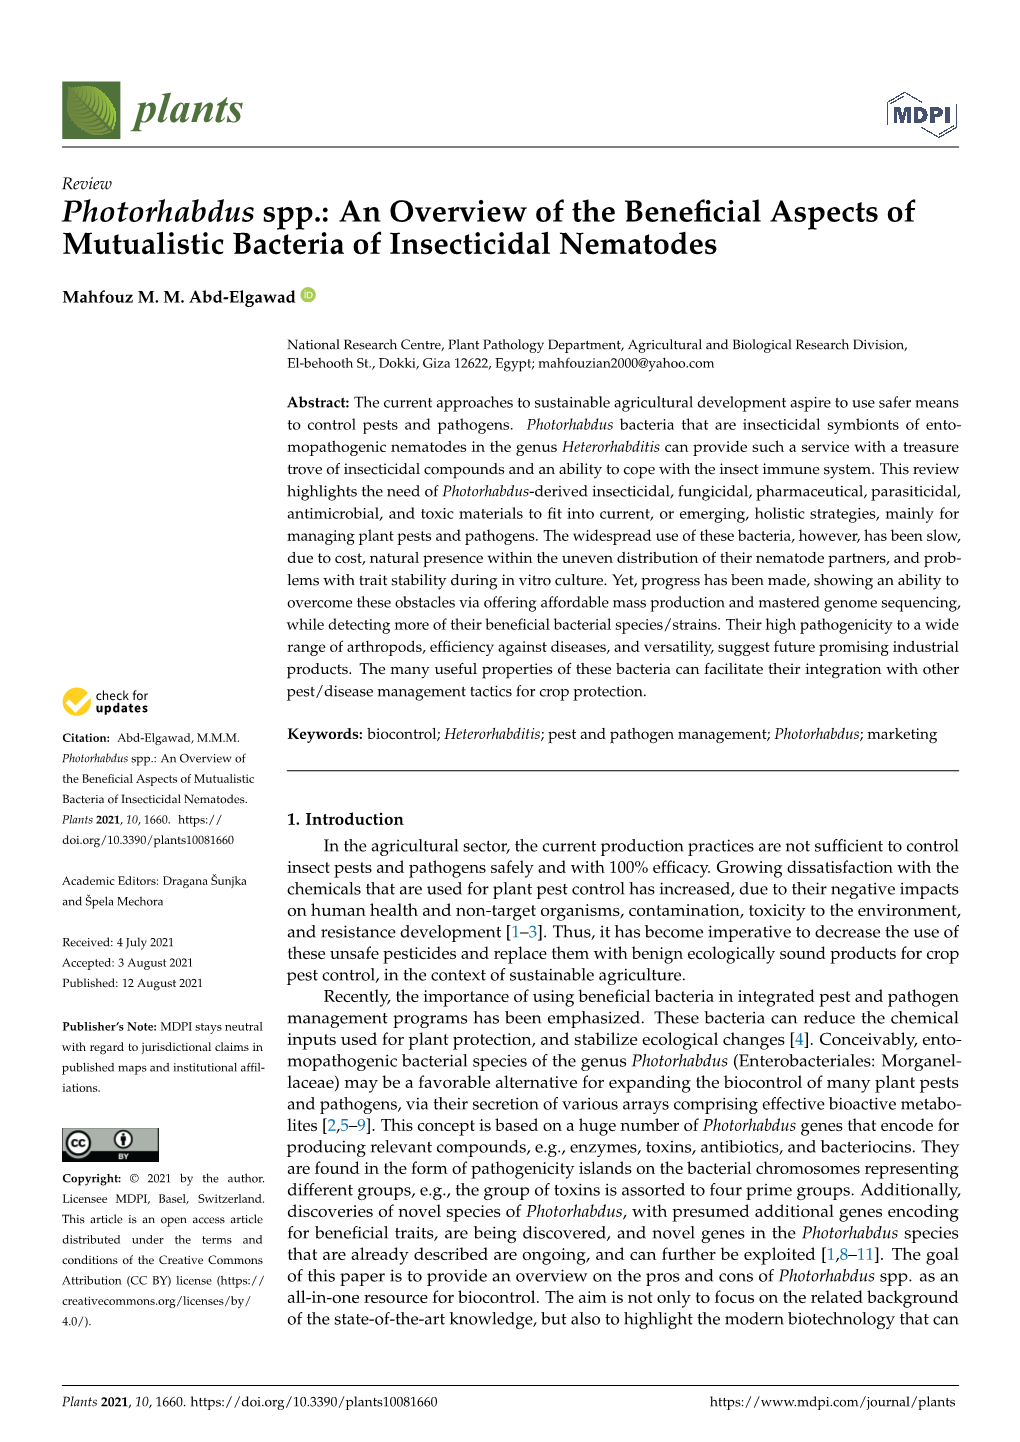 Photorhabdus Spp.: an Overview of the Beneﬁcial Aspects of Mutualistic Bacteria of Insecticidal Nematodes